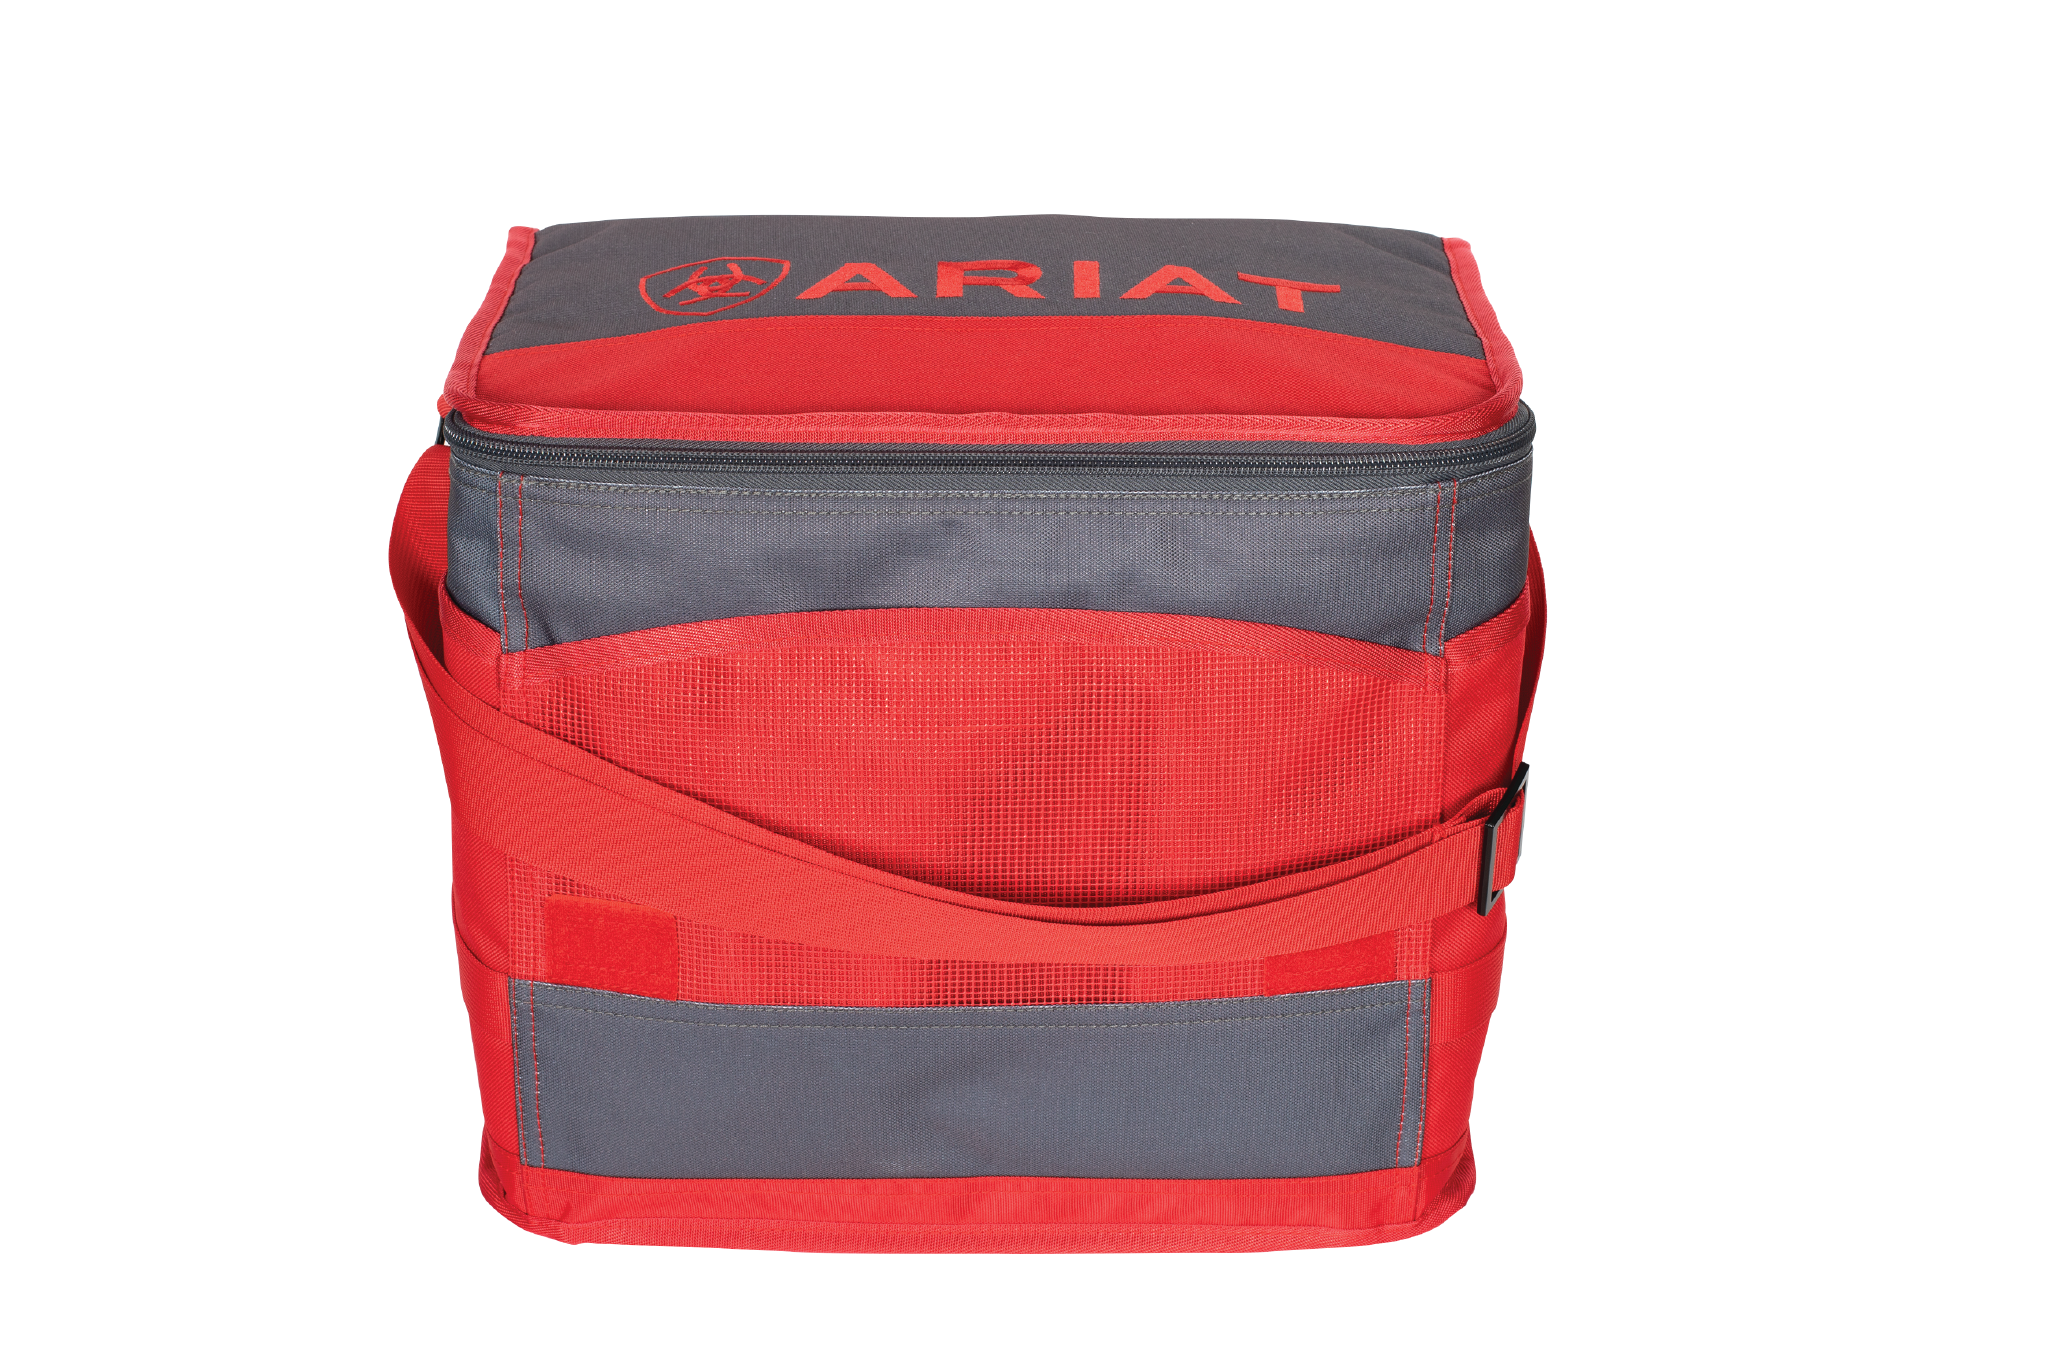 Ariat Cooler Bag - Red and Charcoal